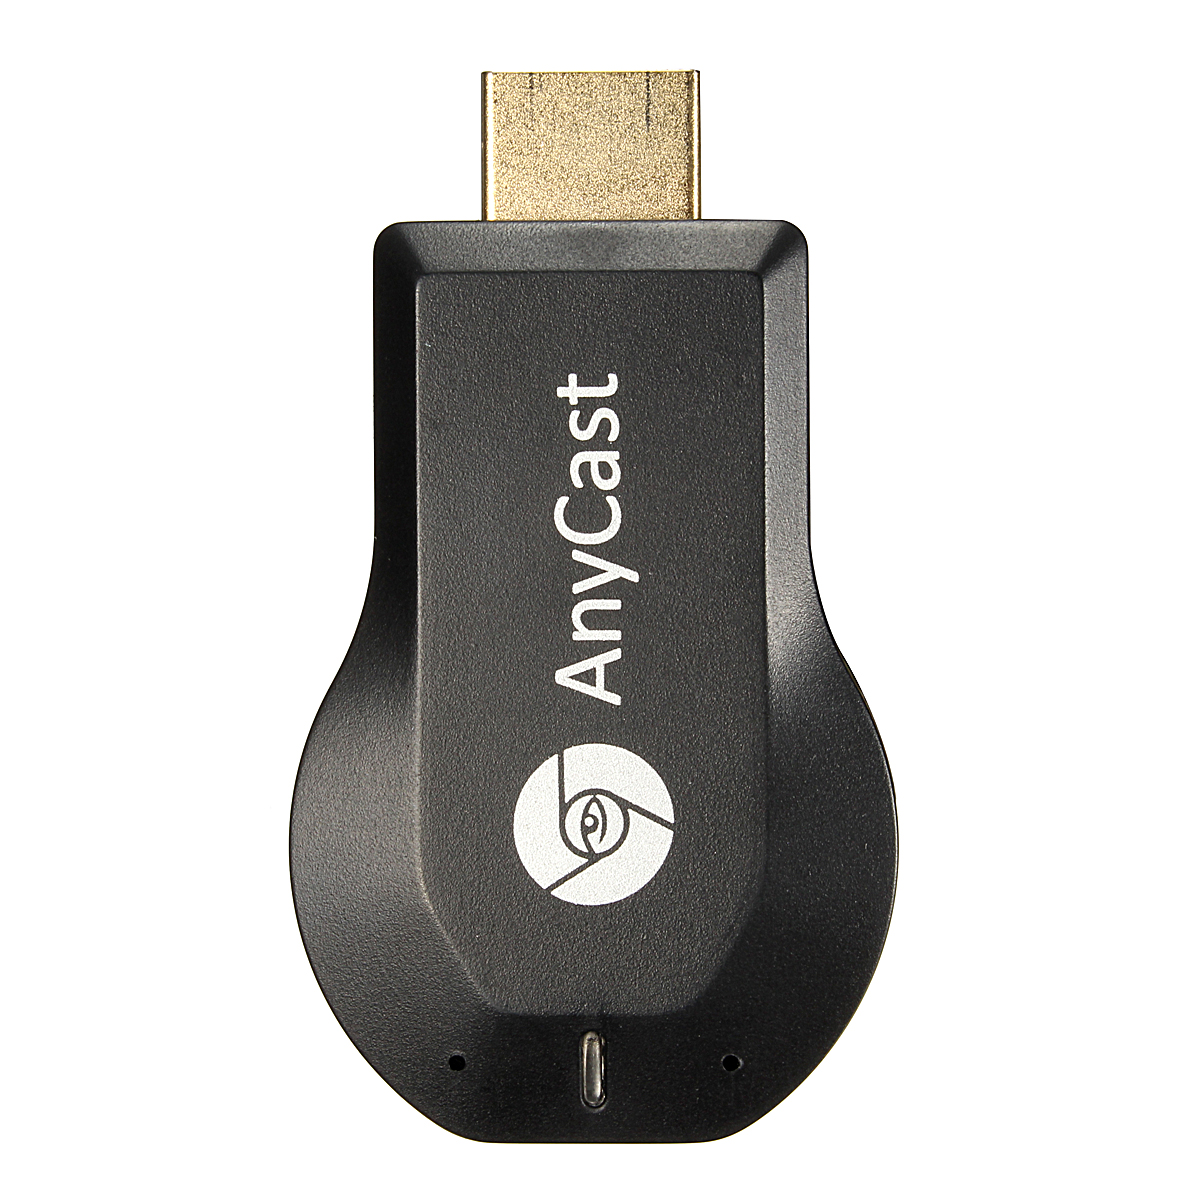 AnyCast WiFi Display Dongle Miracast TV Dongle HDMI DLNA